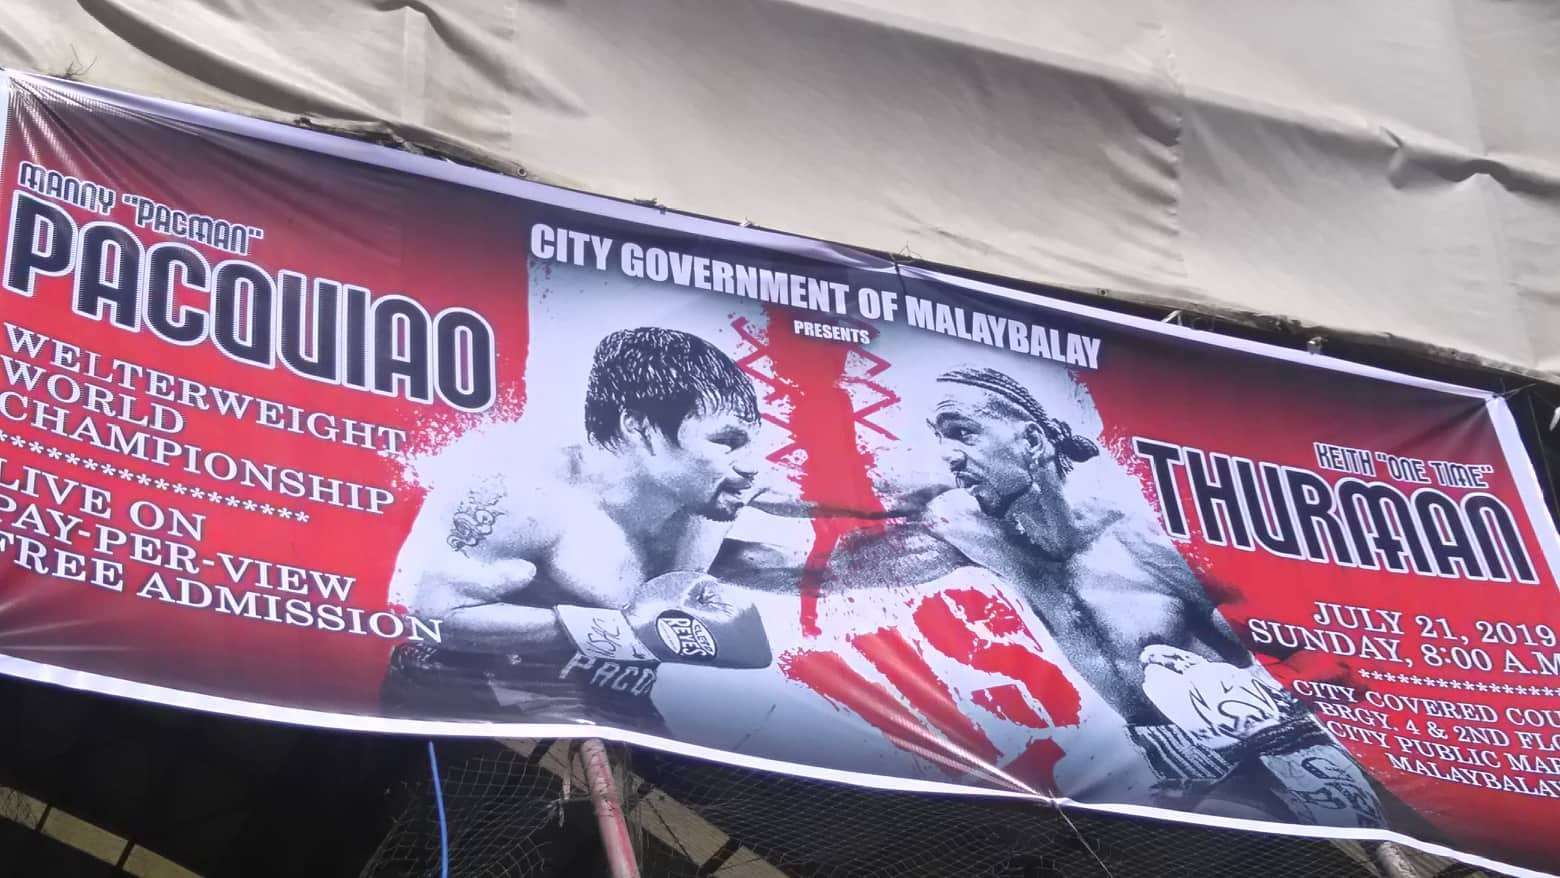 Pacquiao - Thurman fight free live streaming